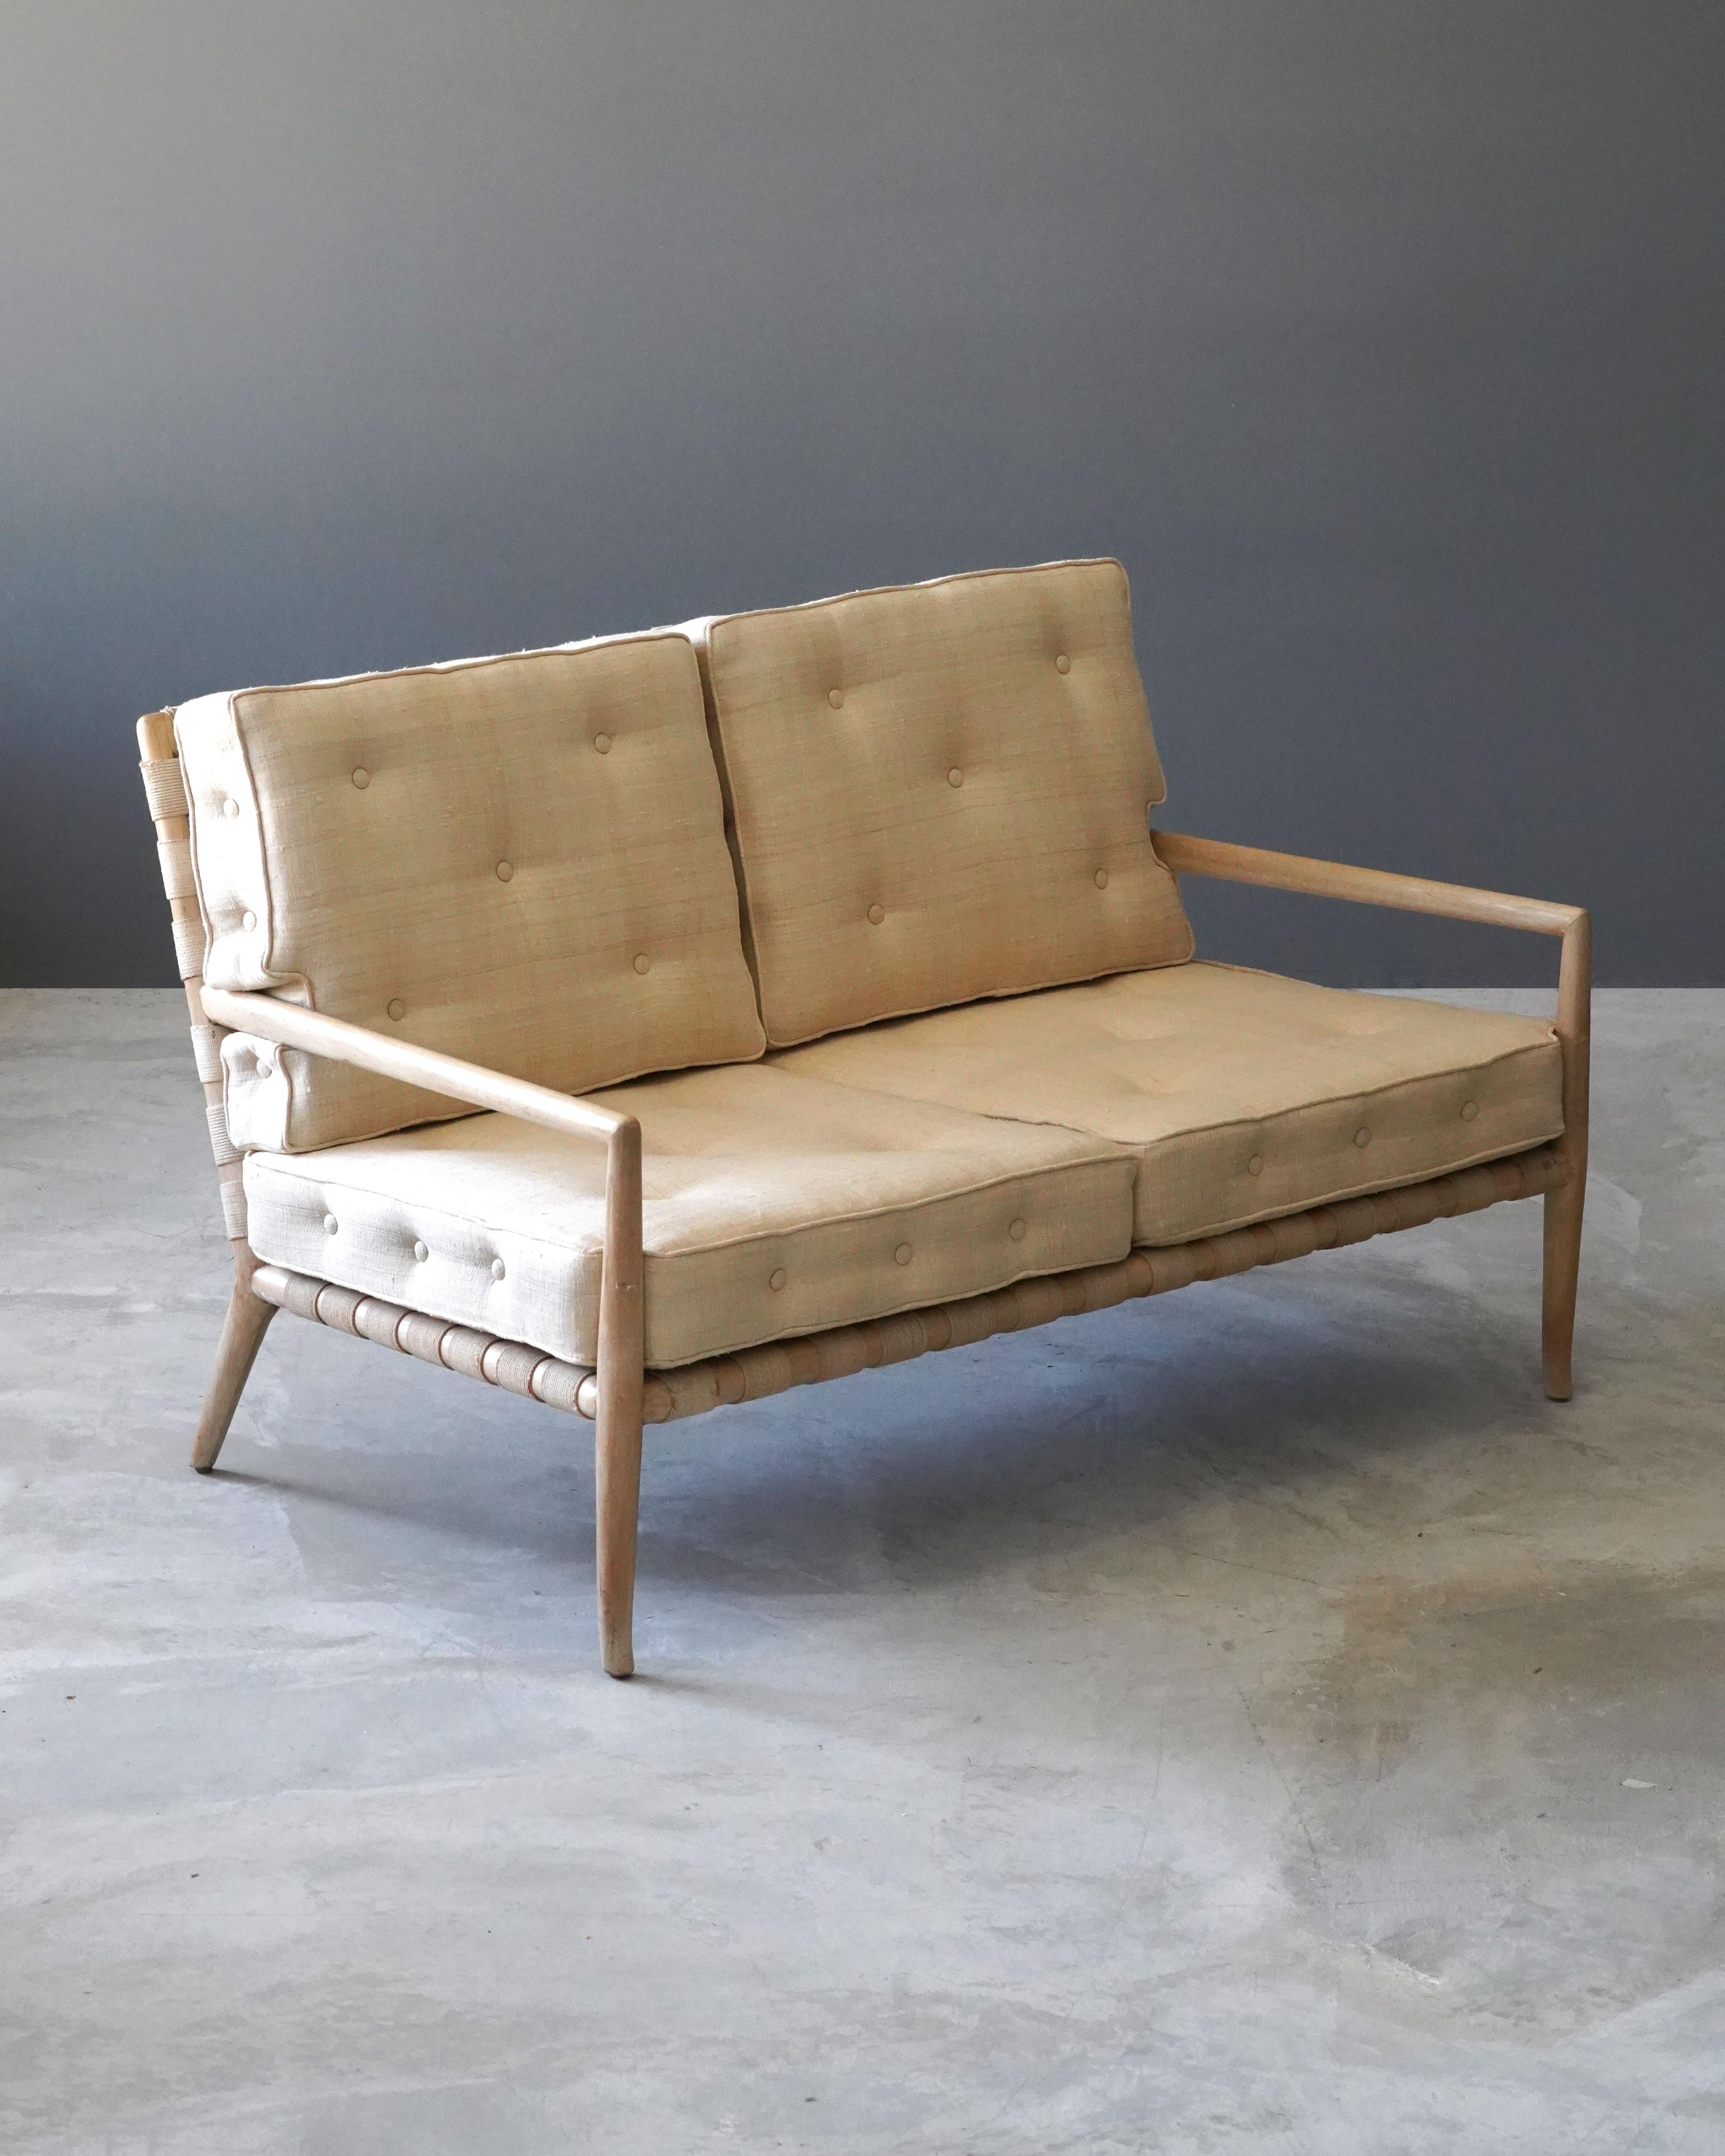 A lounge settee or 2-seat sofa designed by T.H. Robsjohn-Gibbings. Produced by Widdicomb Furniture Company in Grand Rapids, Michigan, circa 1950s. Executed in walnut, original webbing, seat cushions with brand new high-end fabric upholstery.